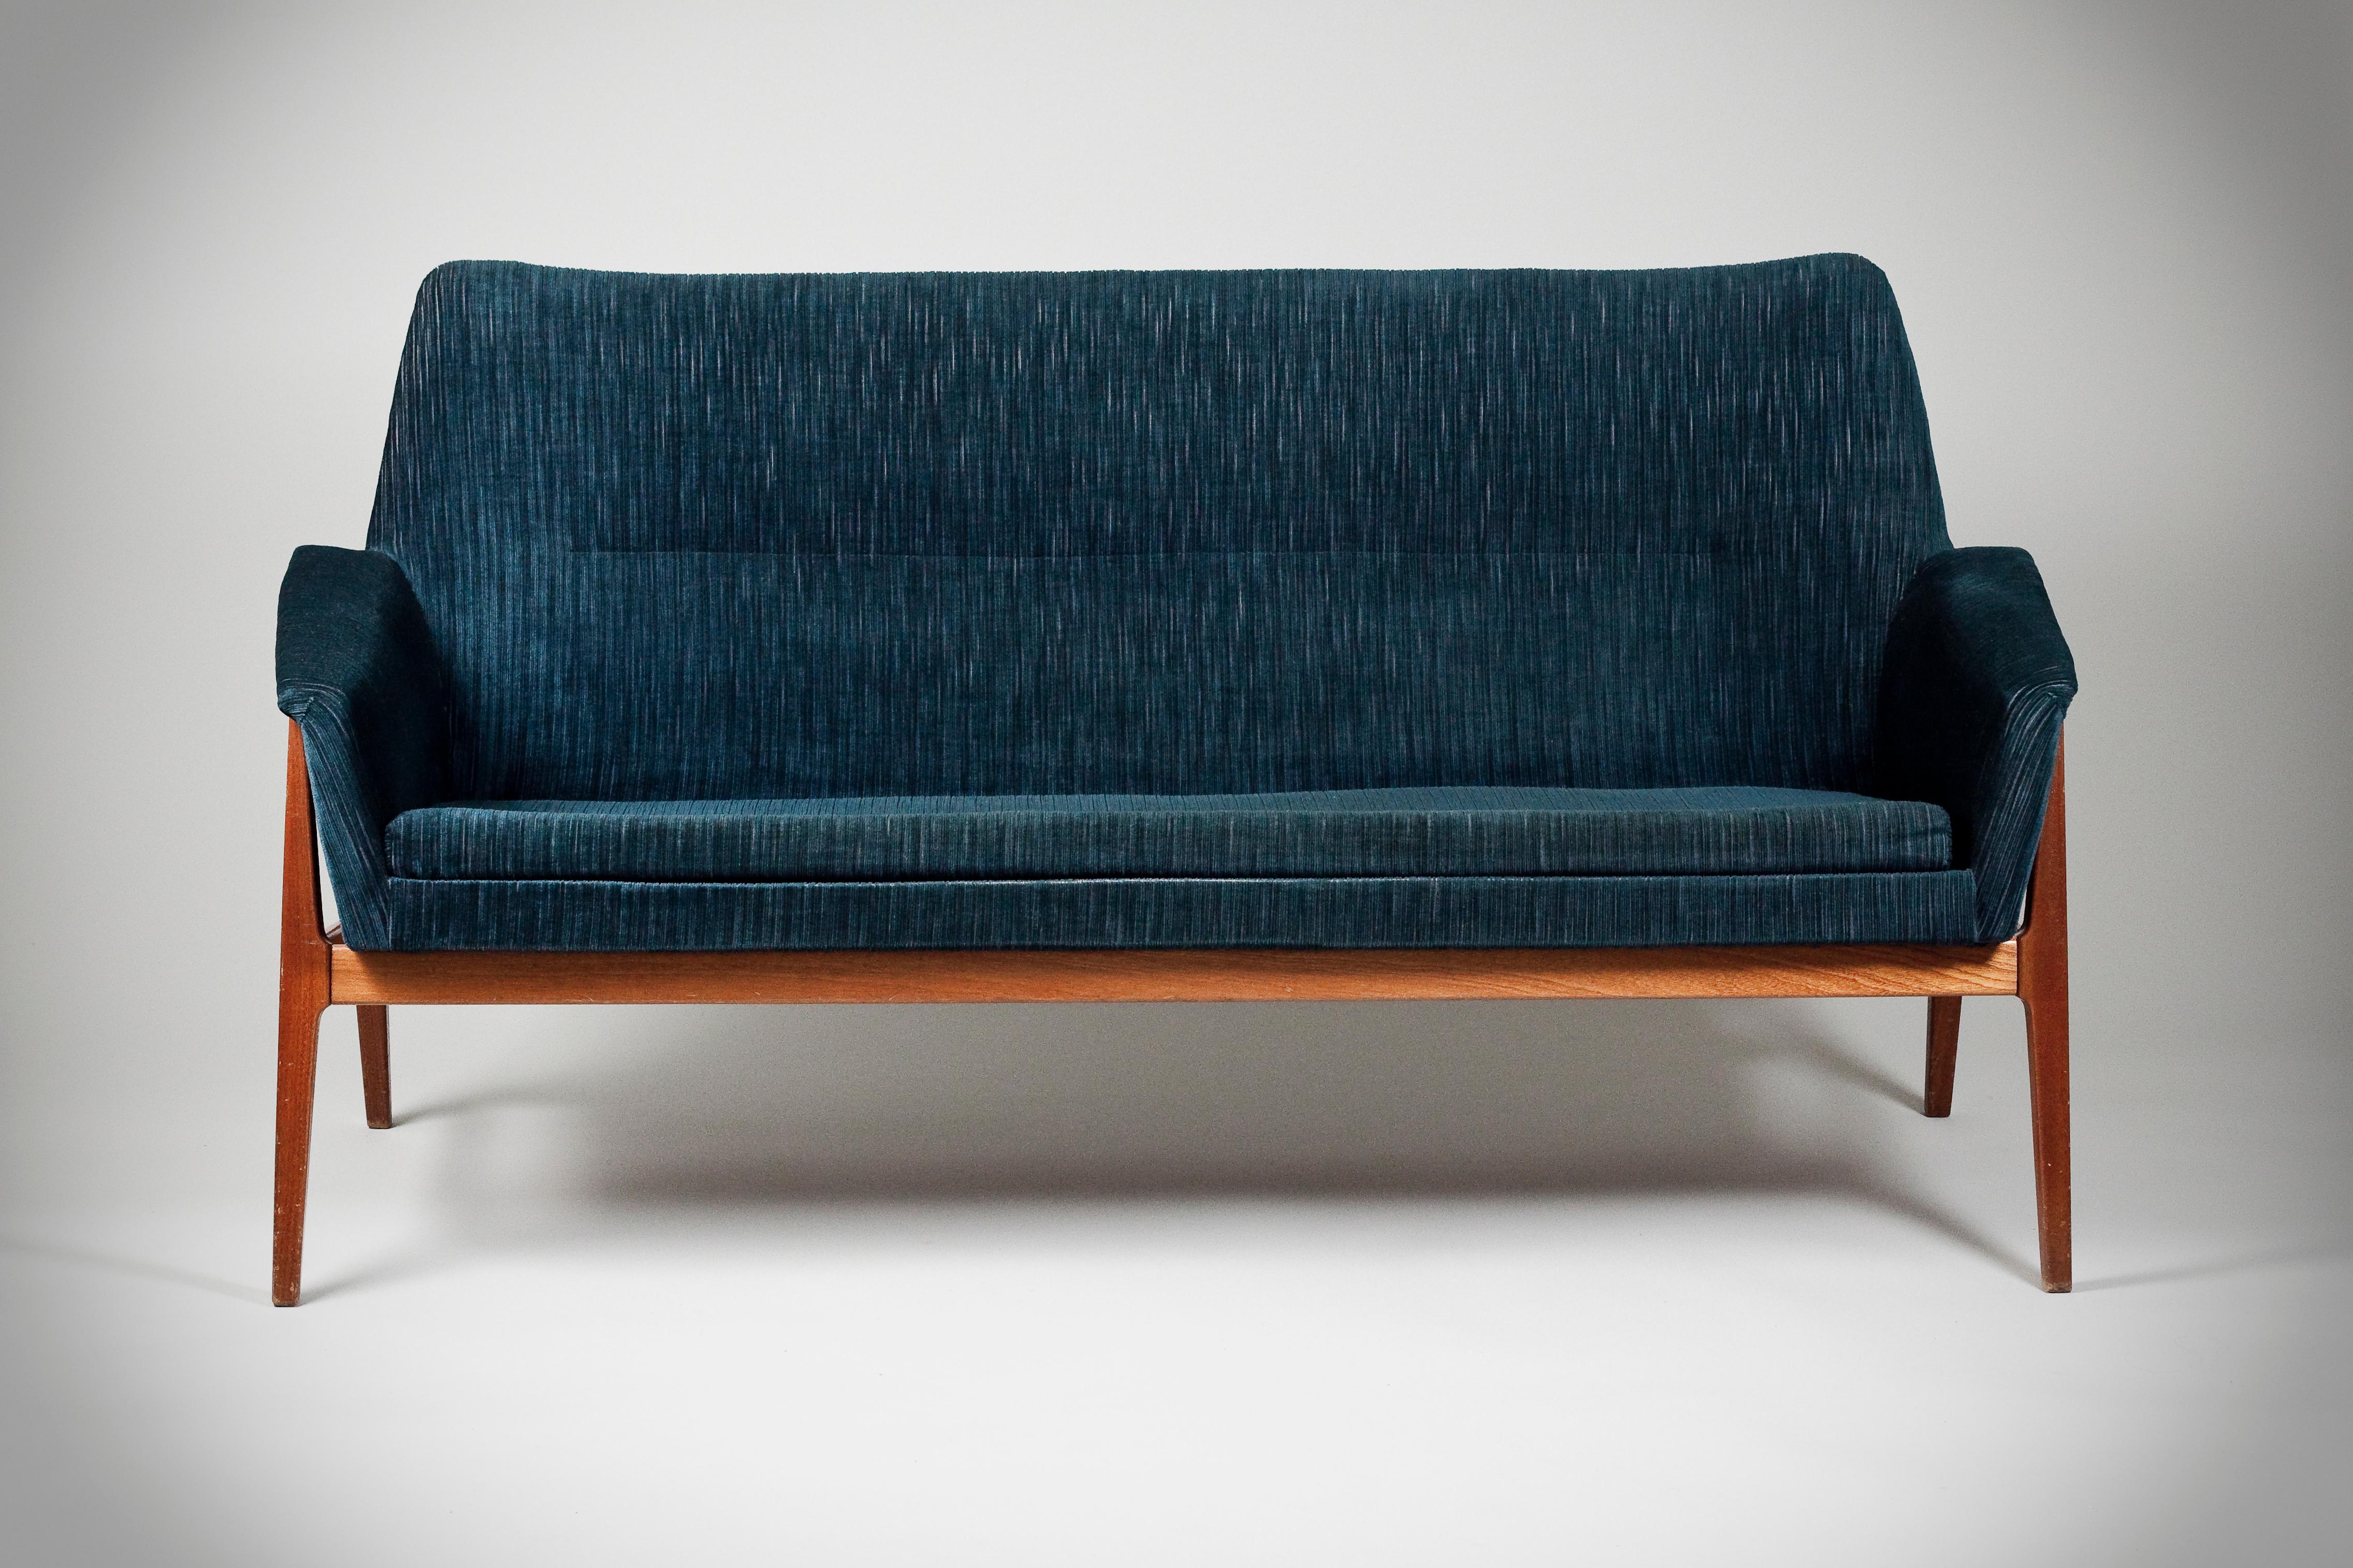 Light Scandinavian Mid-Century Modern blue sofa with teak legs. The sofa is equally beautiful from the back as the front.